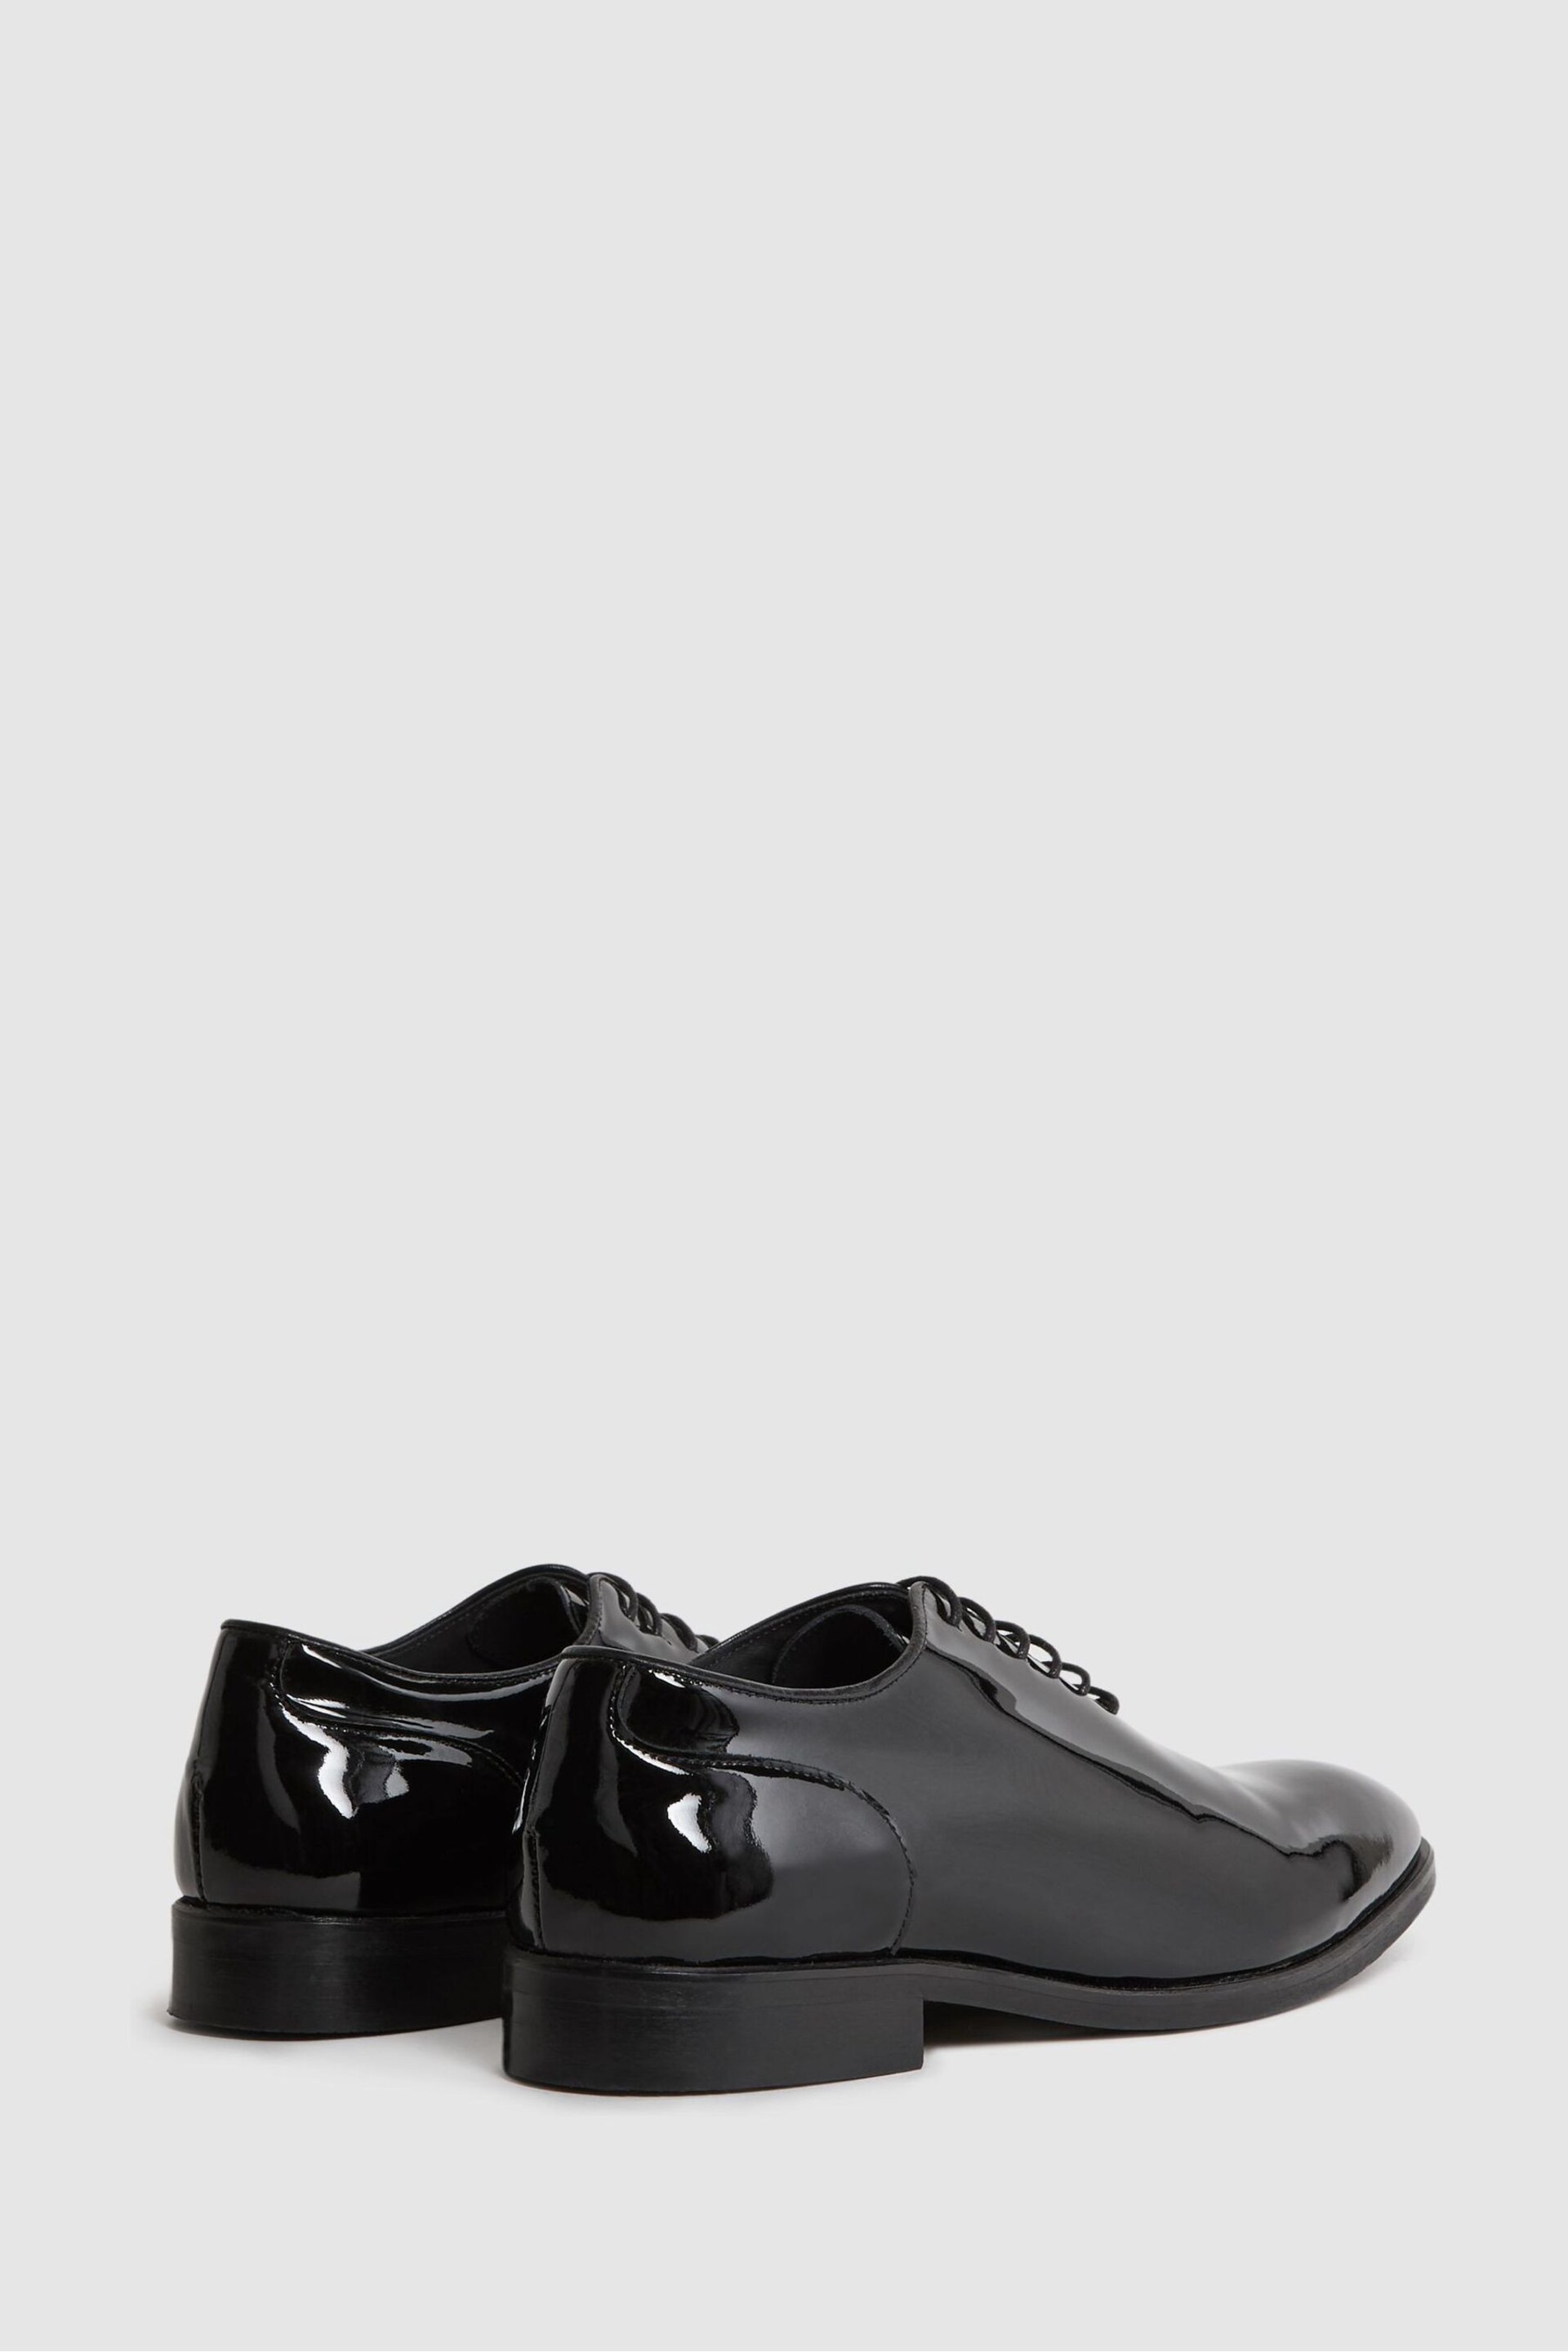 Reiss Black Bay Leather Whole Cut Shoes - Image 4 of 5